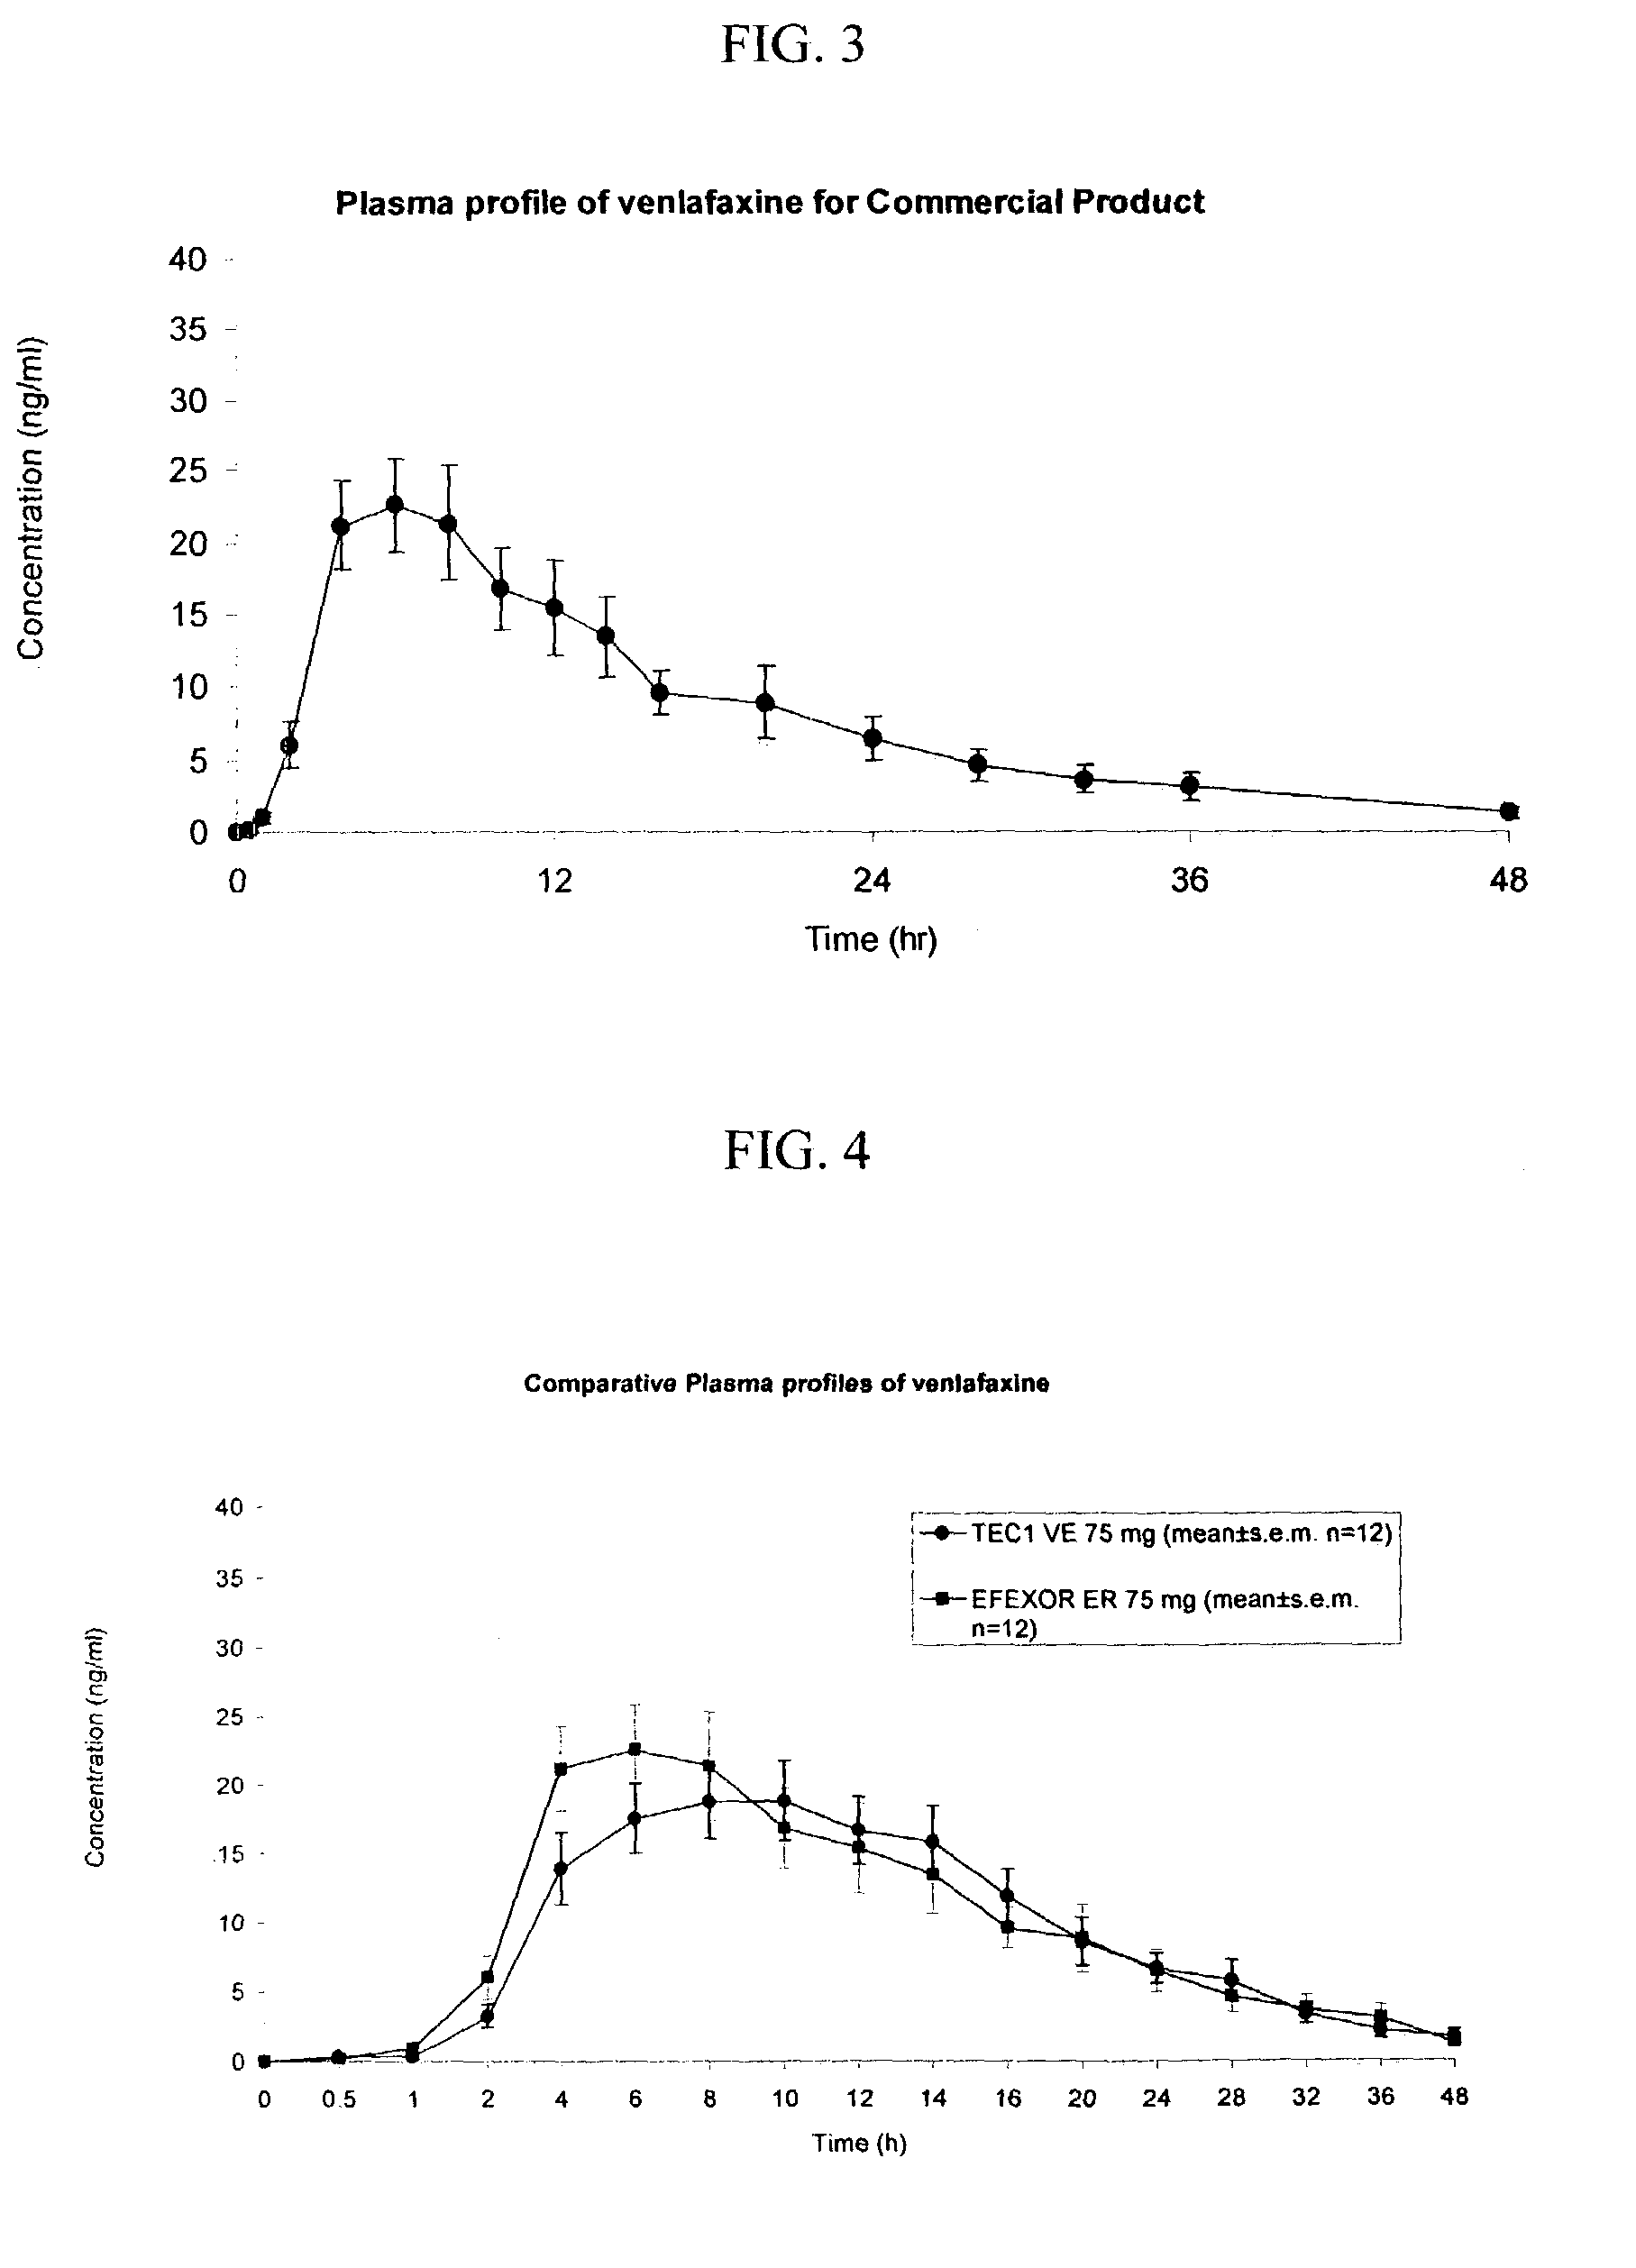 Osmotic device containing venlafaxine and an anti-psychotic agent